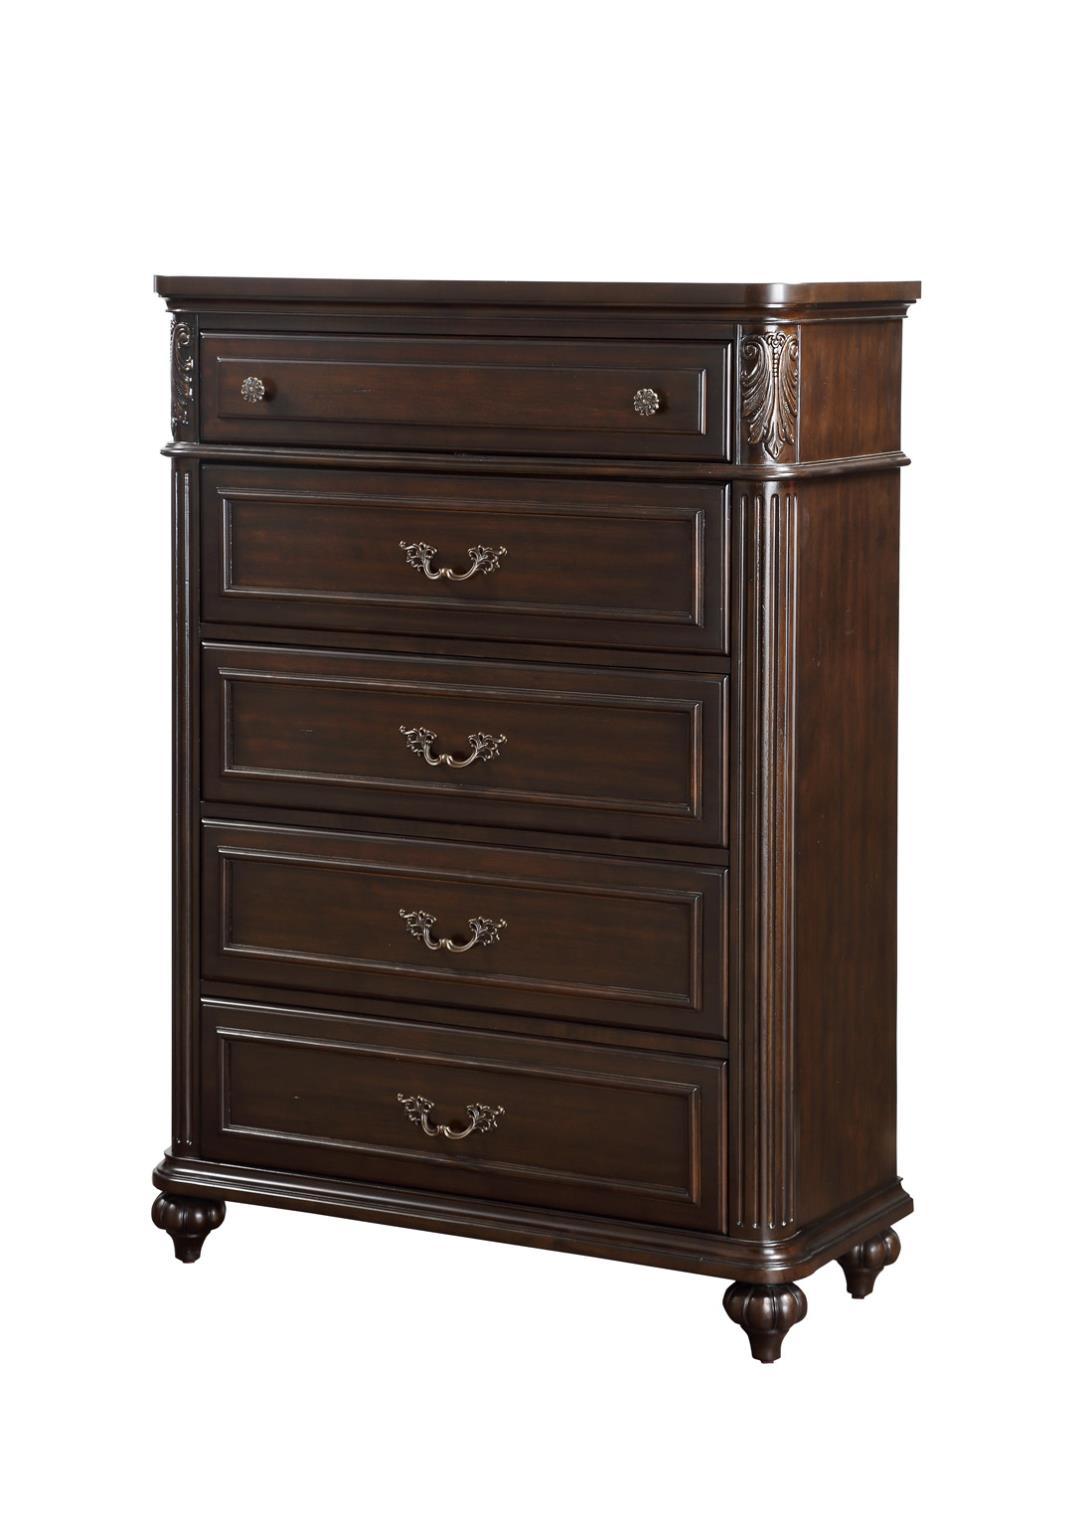 Classic, Transitional Chest NOTTINGHAM 1610-150 1610-150 in Mahogany 